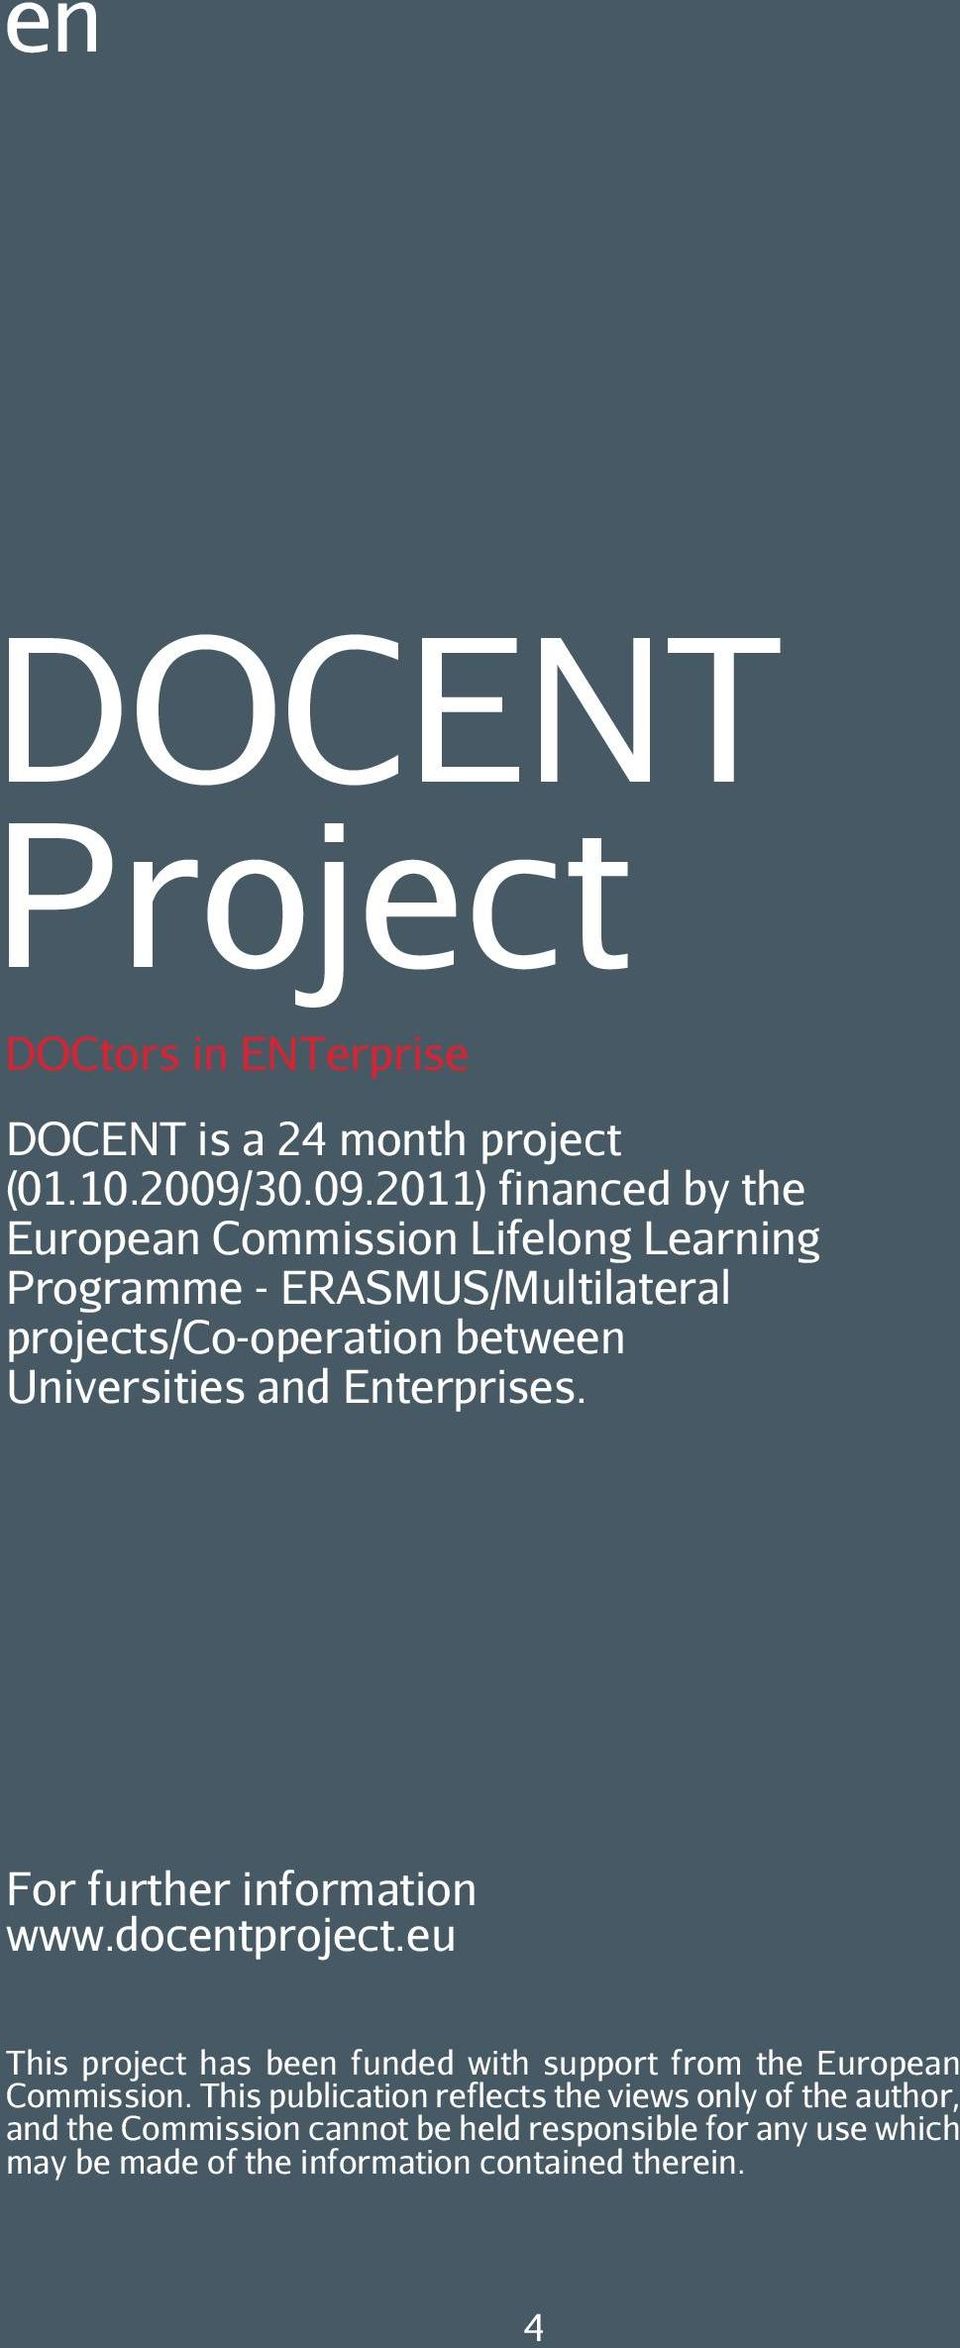 2011) financed by the European Commission Lifelong Learning Programme - ERASMUS/Multilateral projects/co-operation between